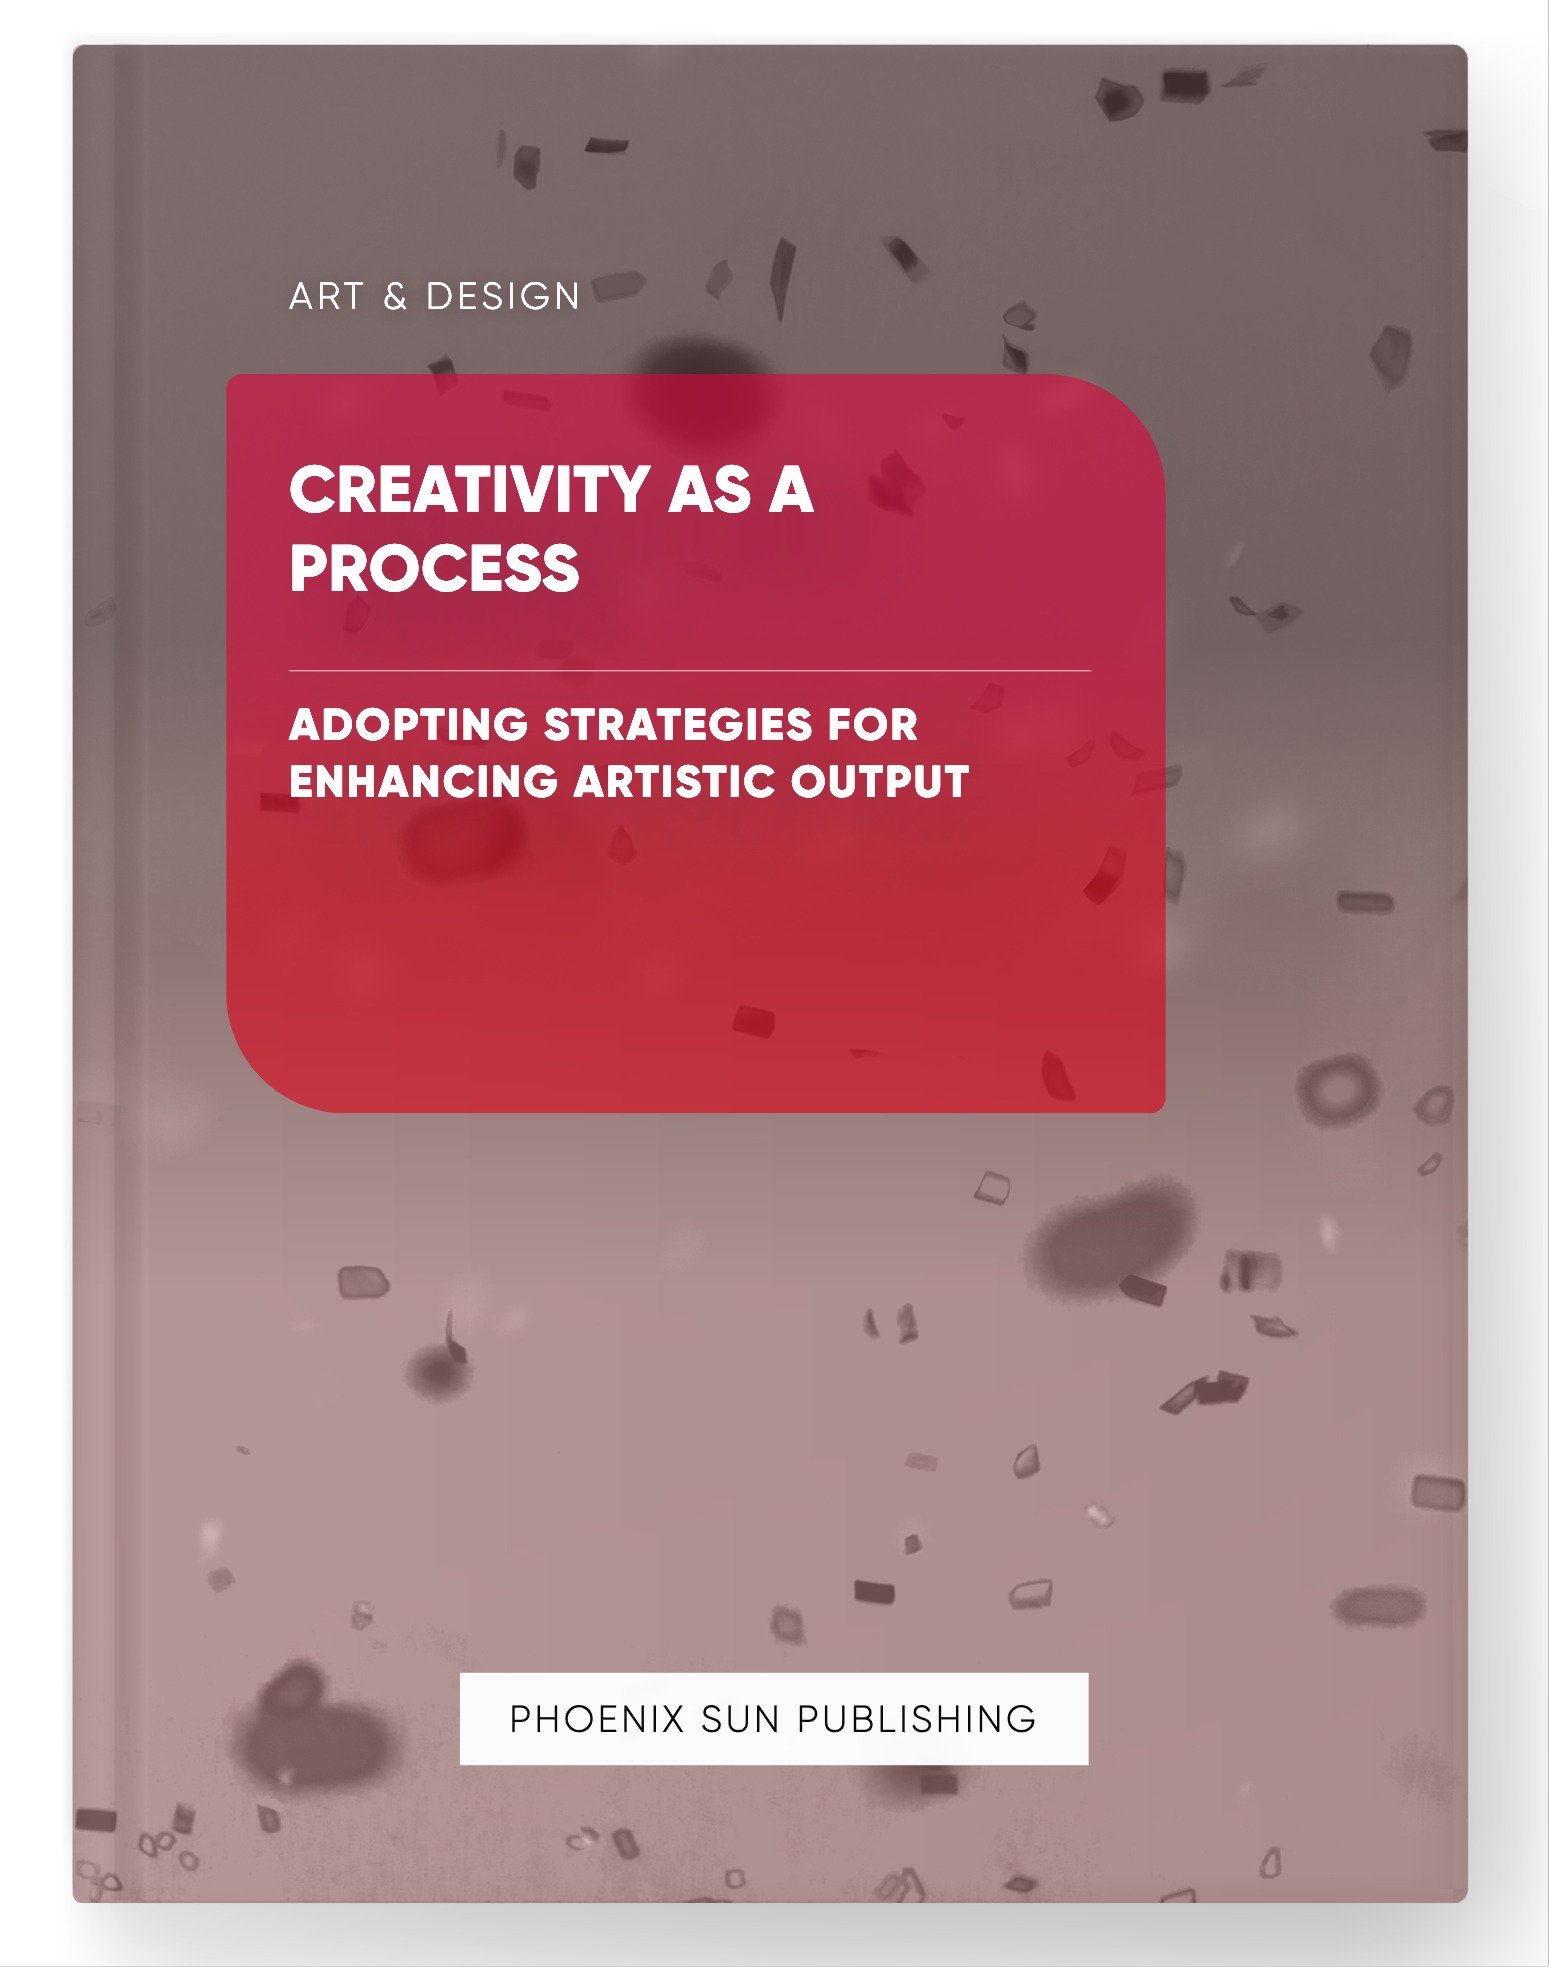 Creativity as a Process – Adopting Strategies for Enhancing Artistic Output